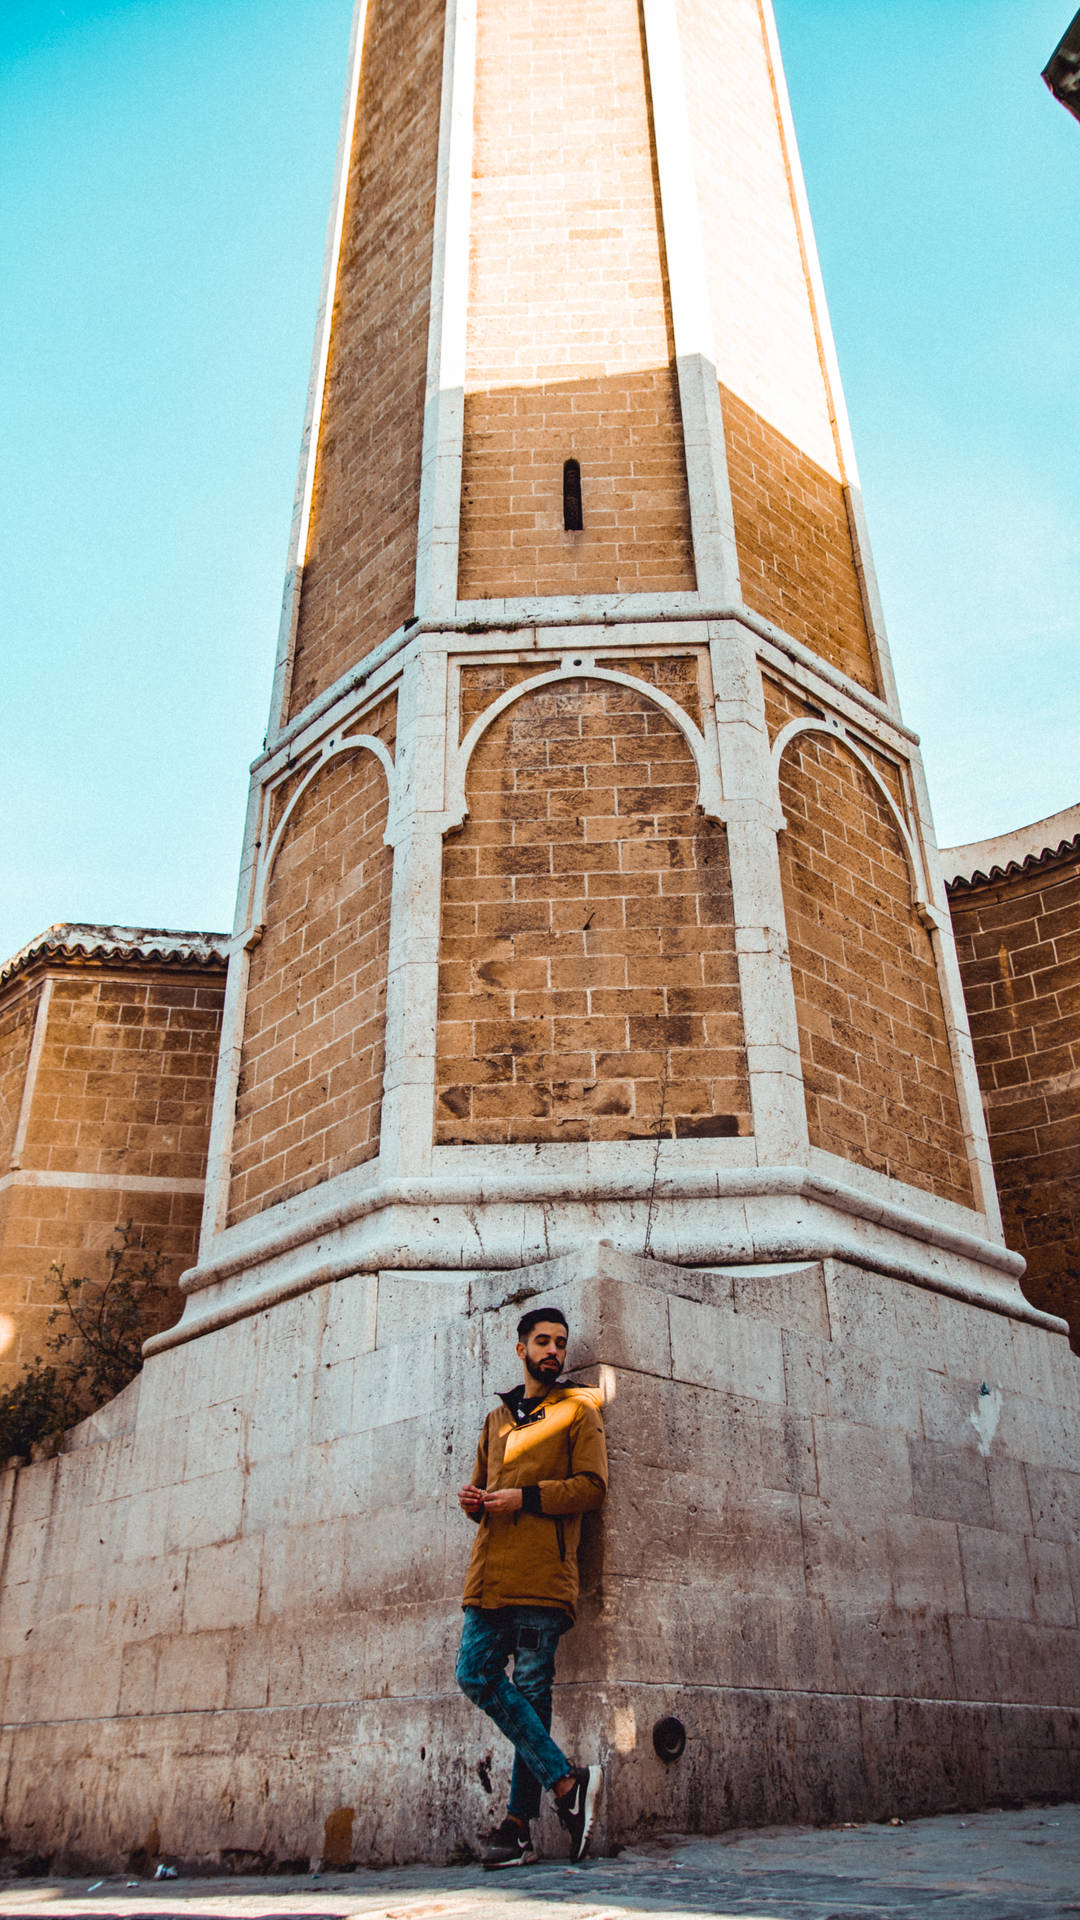 Boy And Tower In Tunisia Background